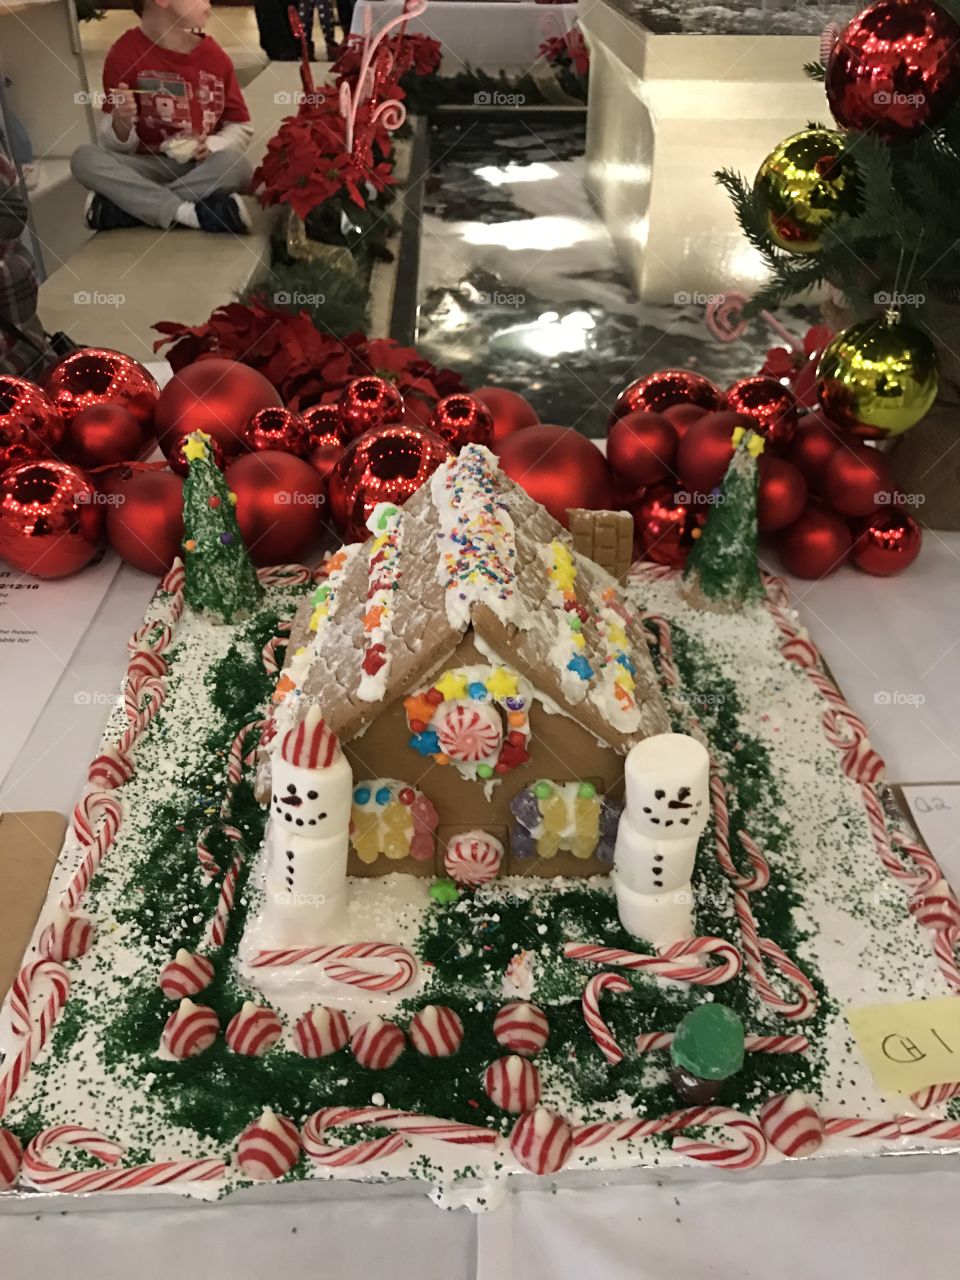 Gingerbread competition entry